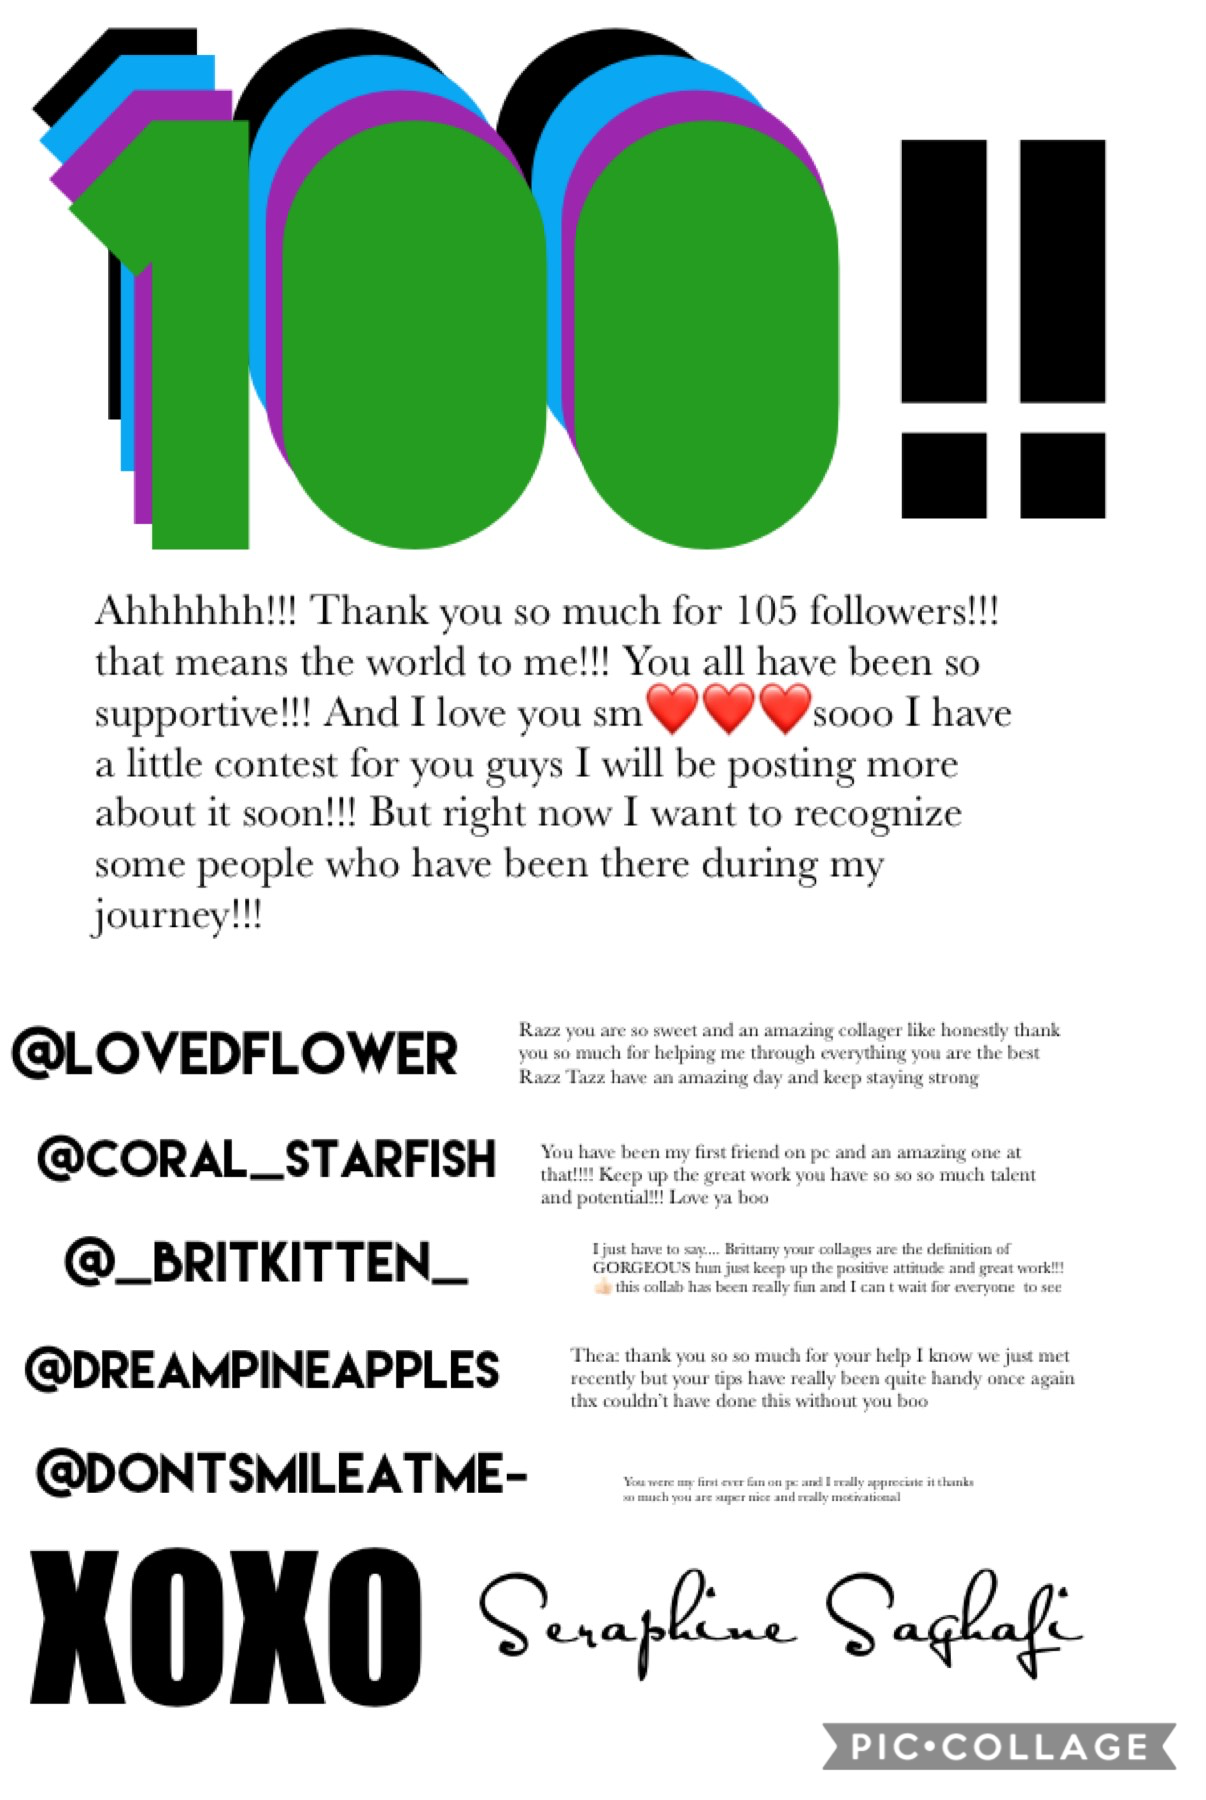 People included in my collage plz go spam, follow, and give them lots of love❤️❤️❤️❤️ _britkitten_ coral_starfish L0vedFlower DreamPineapple  dontsmileatme-